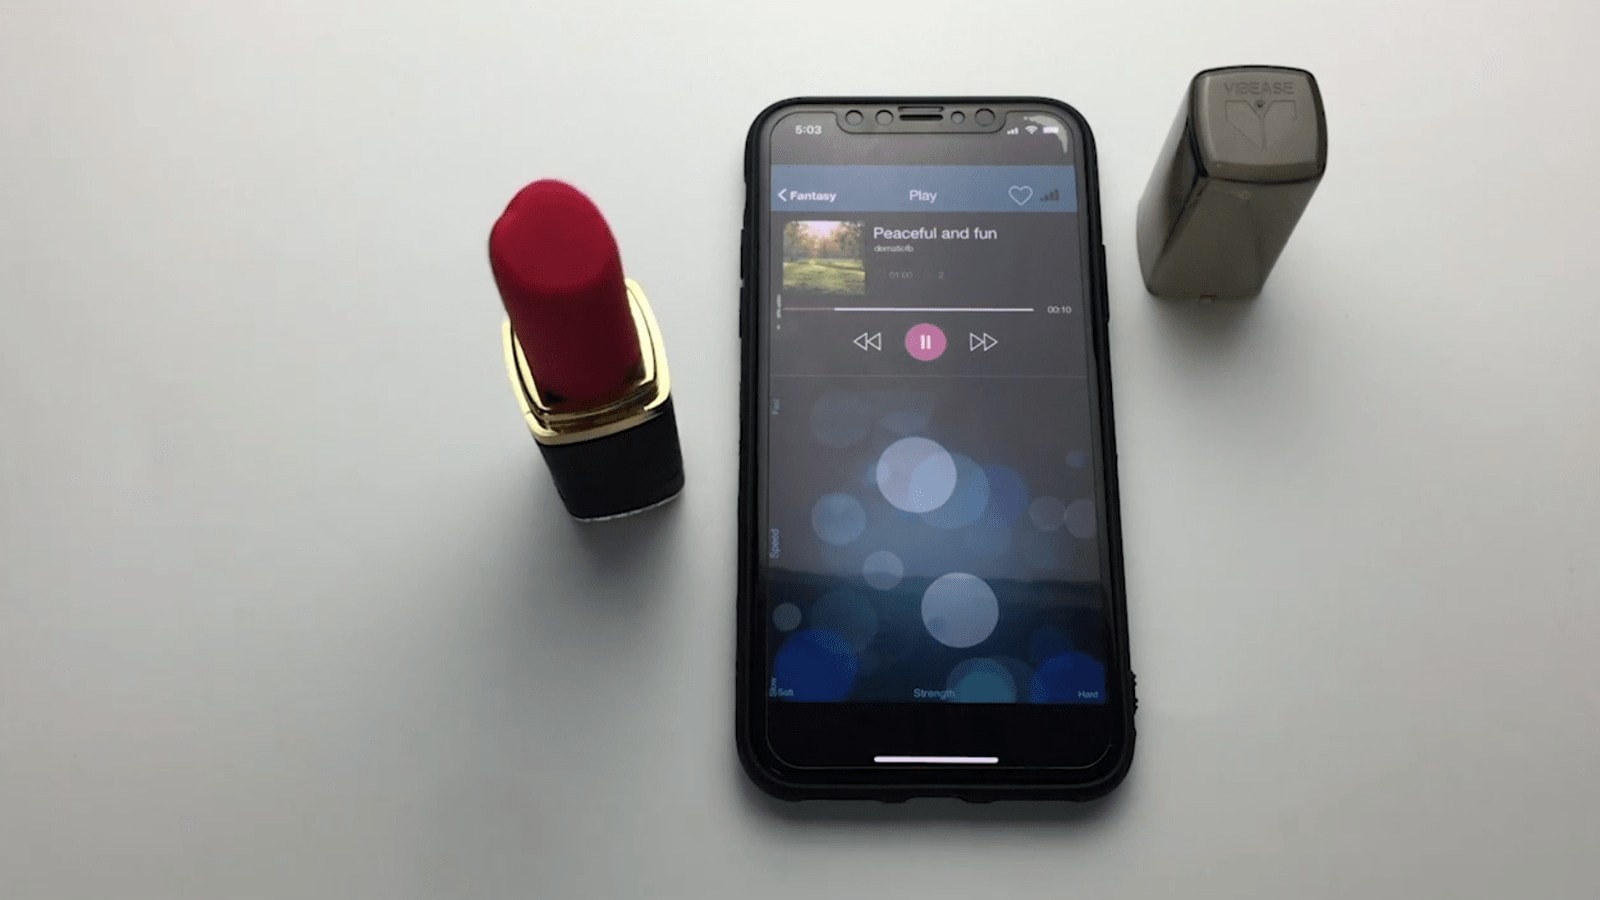 A smartphone paired with a Vibease Lipstick vibrator for a discreet and pleasurable experience.